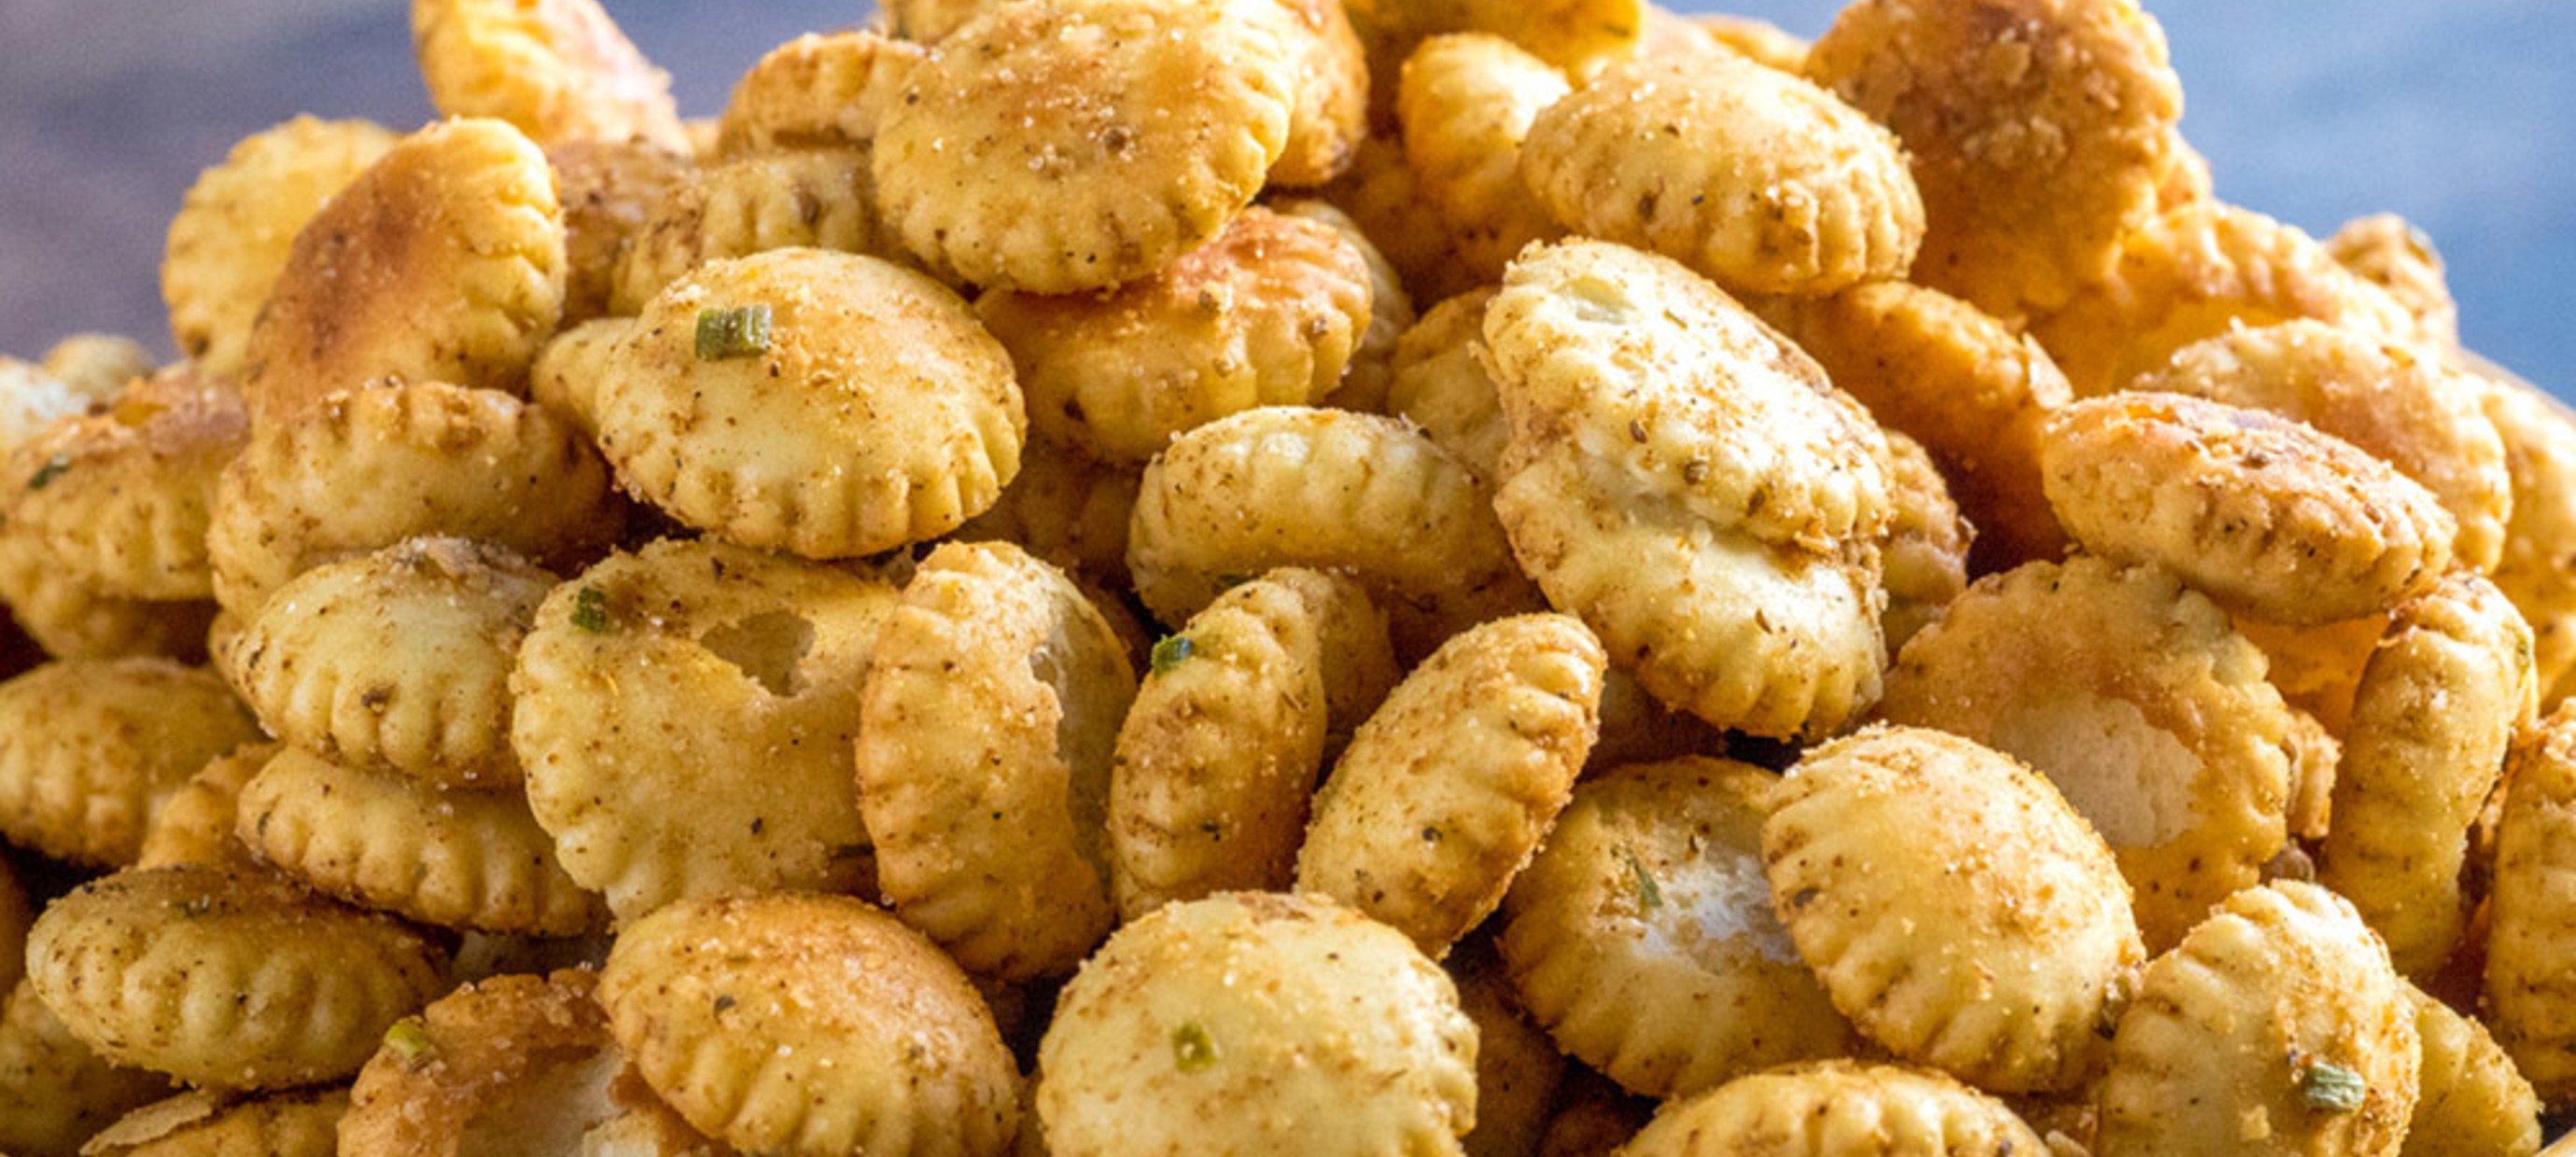 Old Bay Oyster Crackers